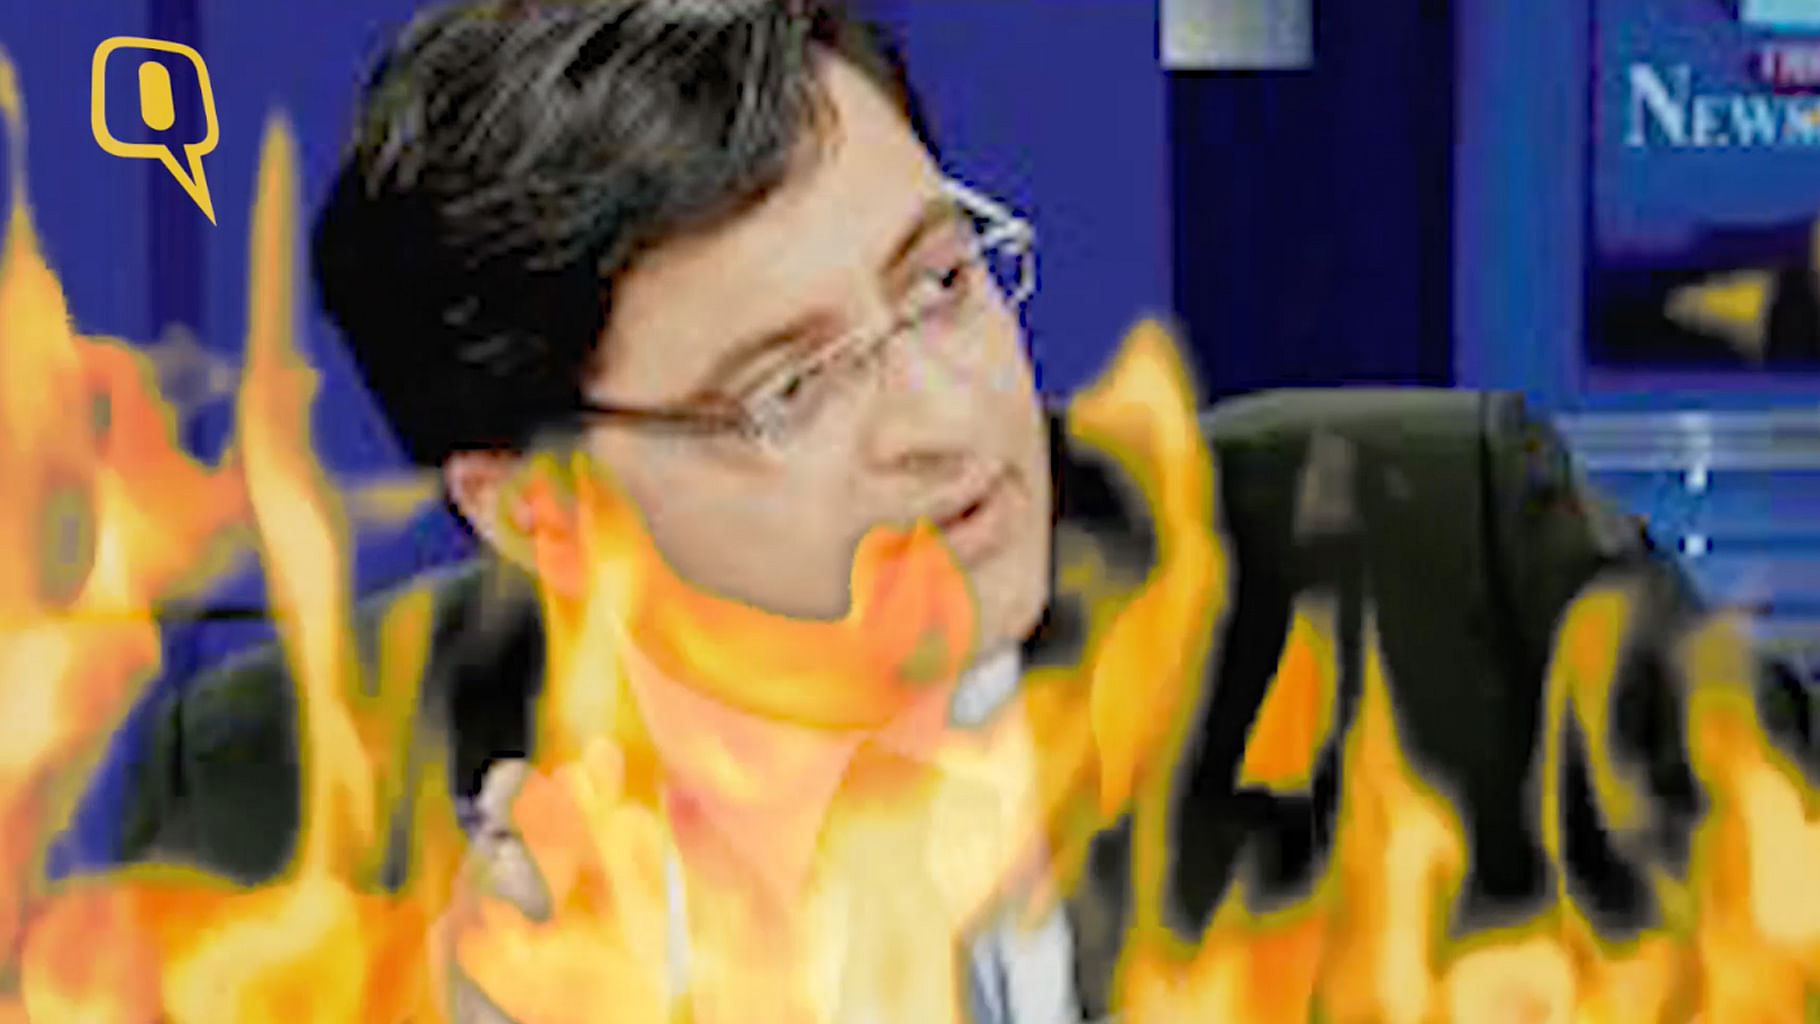 The Quint’s Aakash Joshi has a few burning questions for Arnab Goswami. (Photo: screengrab altered by The Quint)